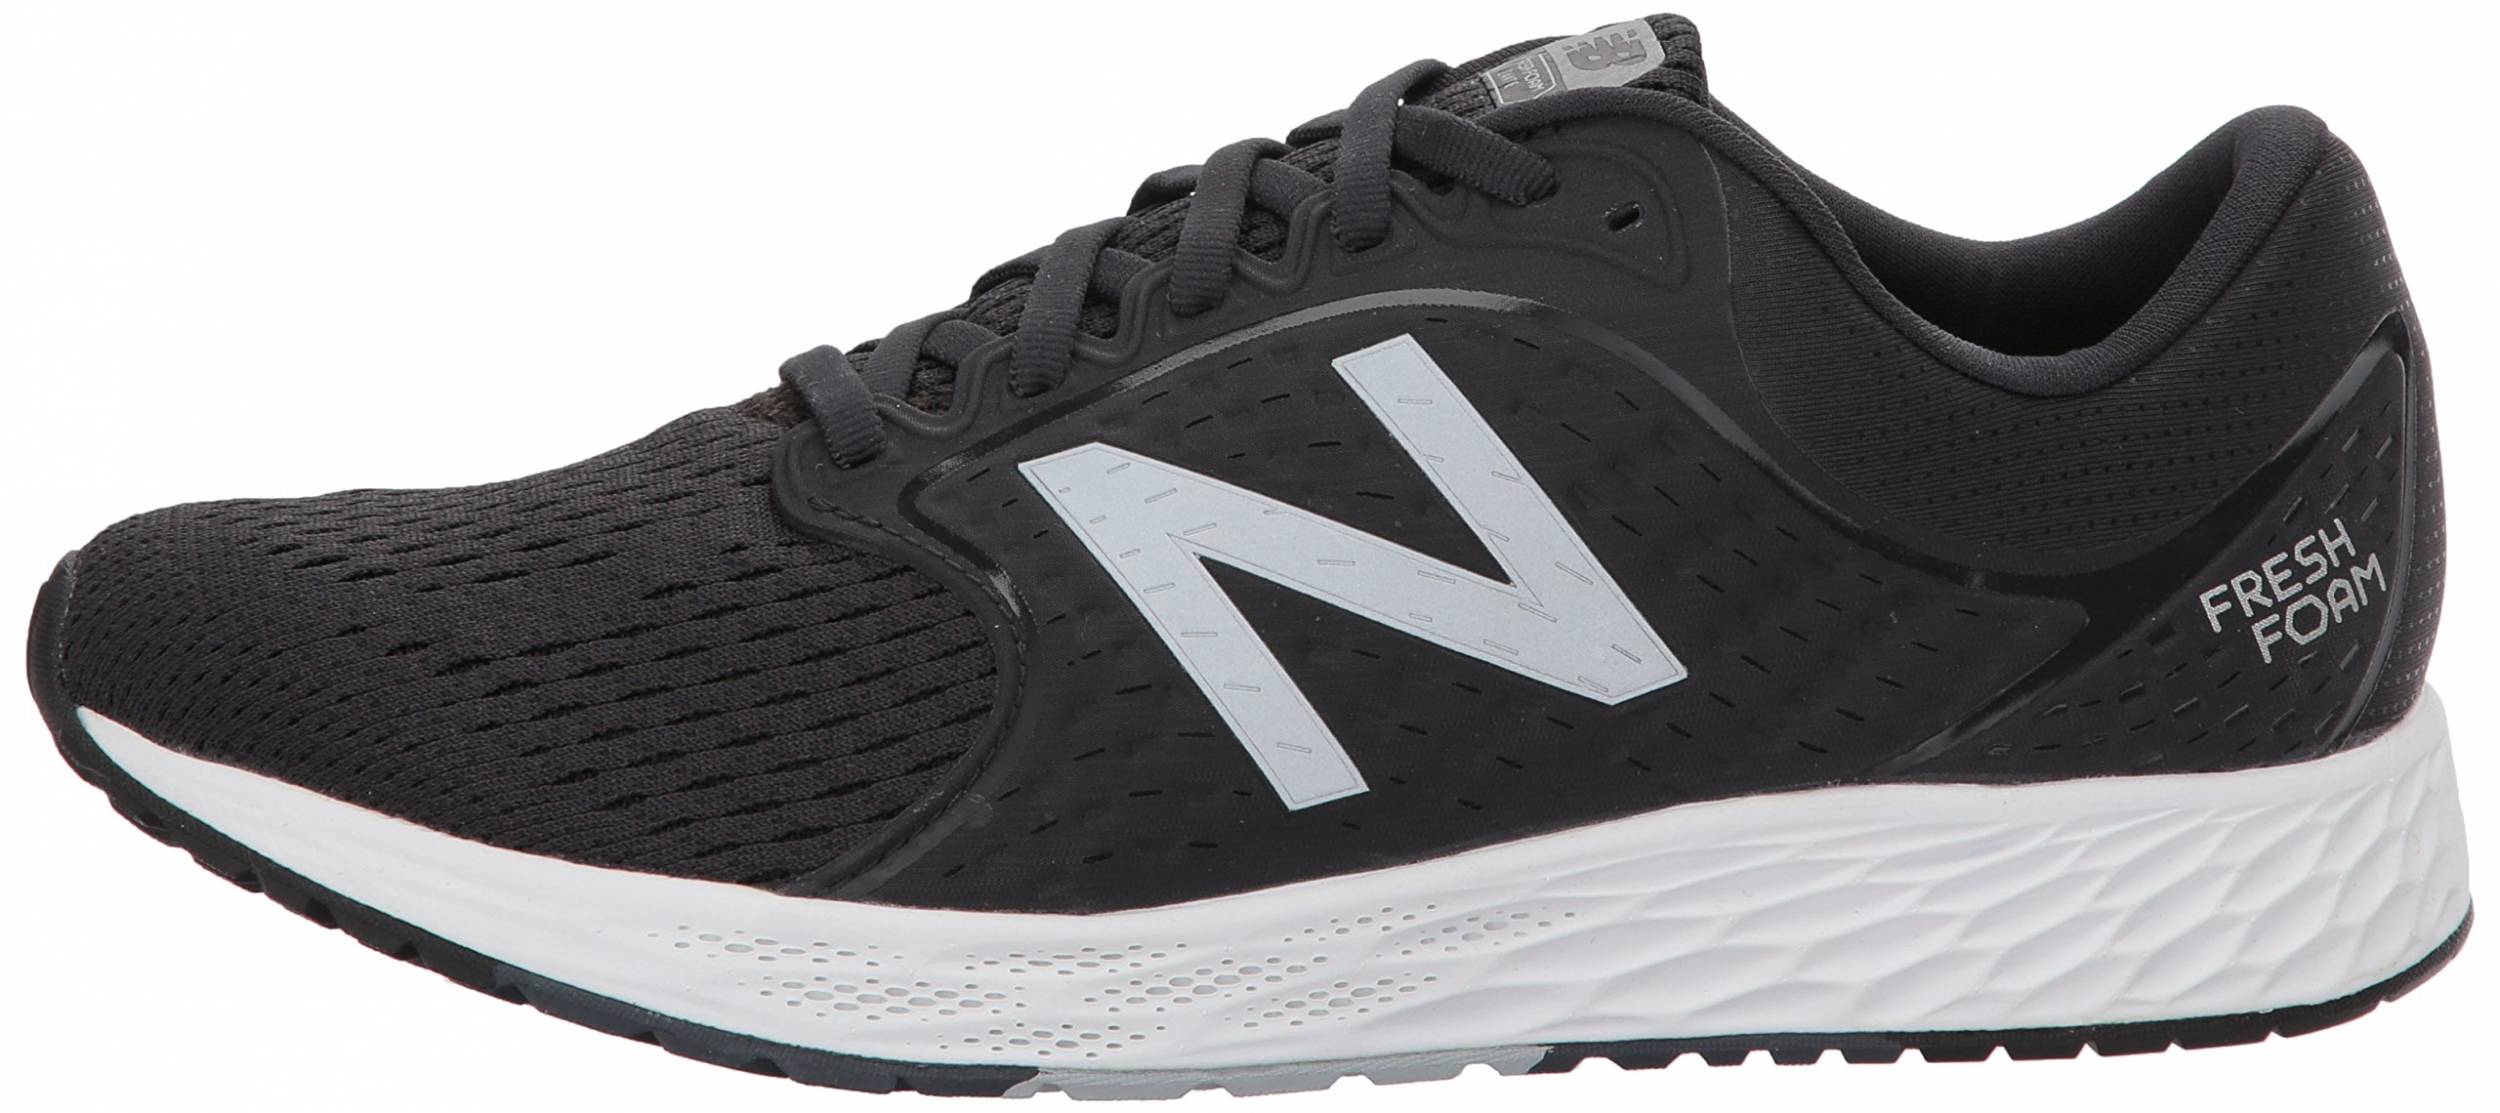 Inward flexible Applicant 30+ New Balance lightweight running shoes: Save up to 49% | RunRepeat